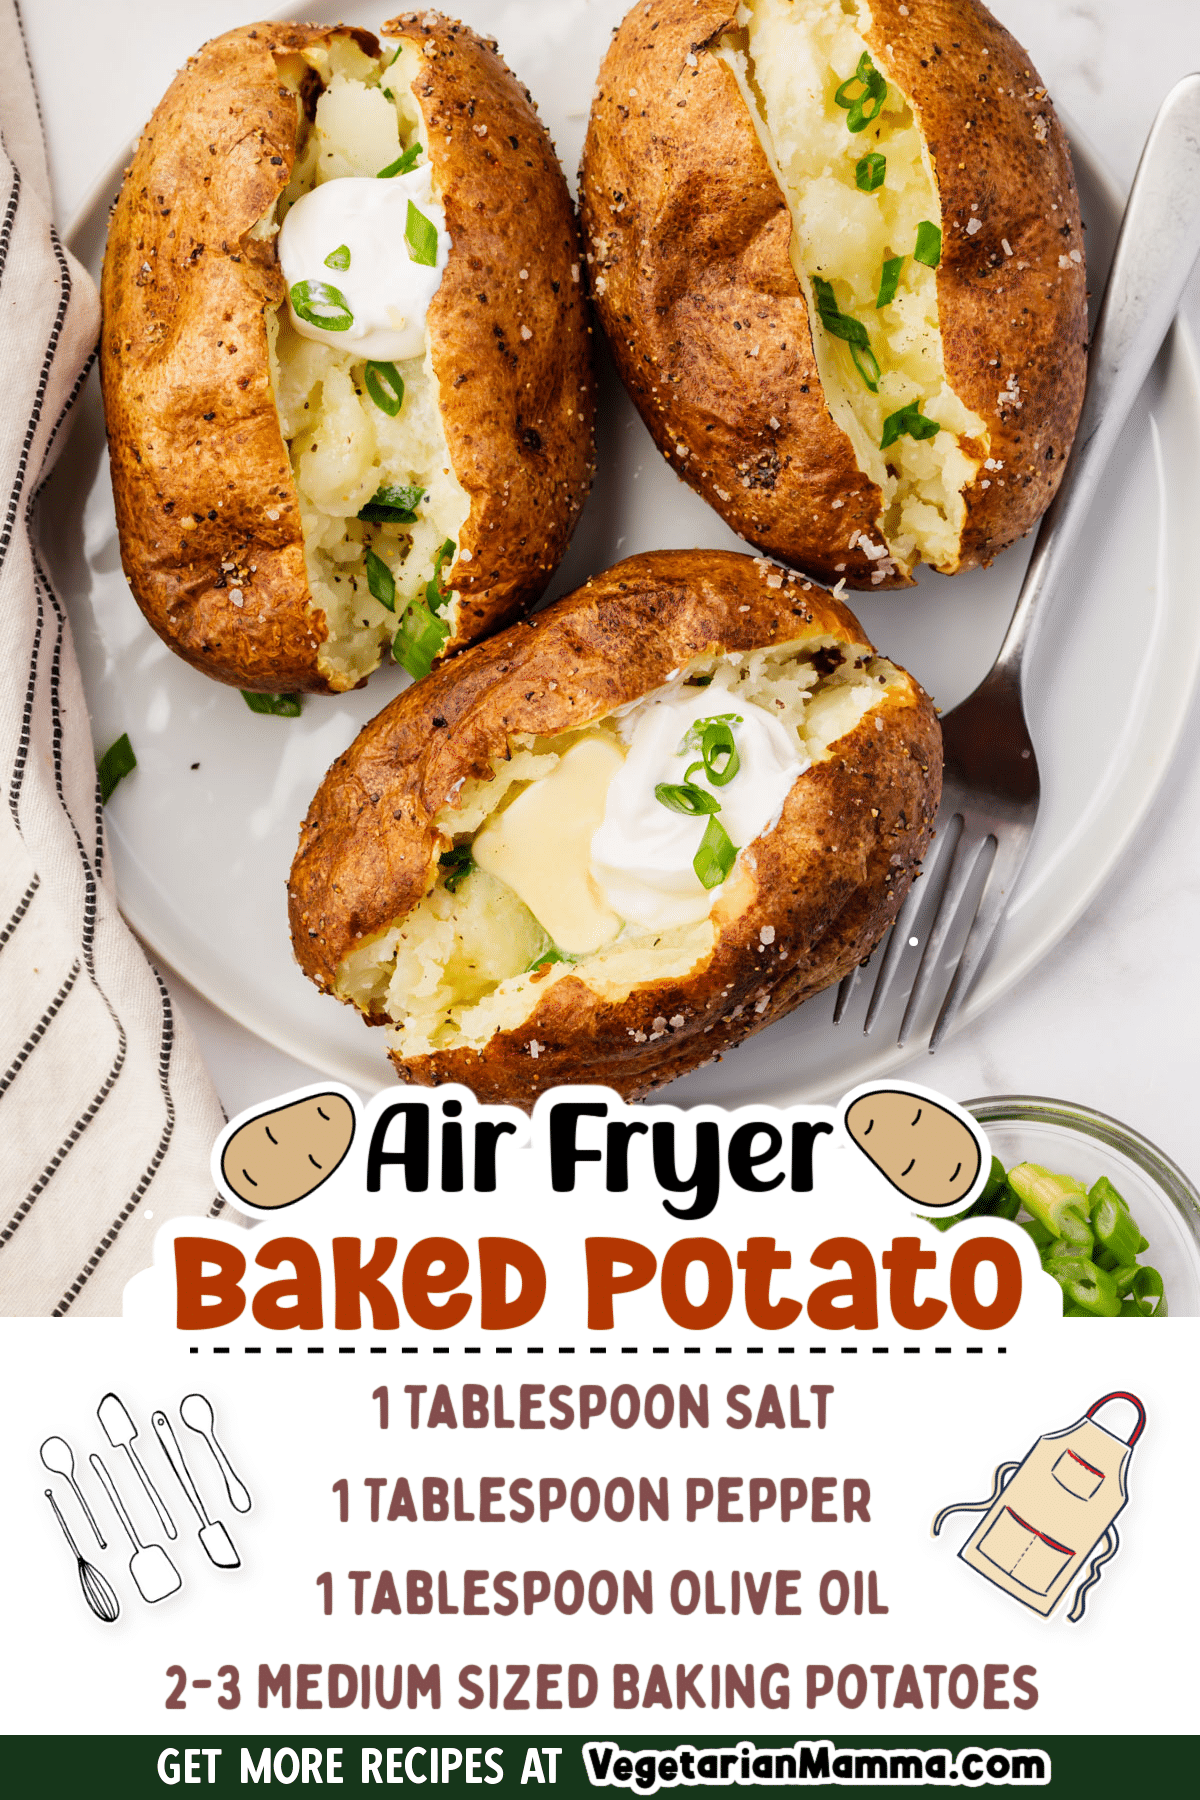 Air Fryer Baked Potatoes are a simple, yet quick and easy way to prepare your baked potatoes. No need to heat your big oven, the air fryer can do it. #airfryer #bakedpotatoes